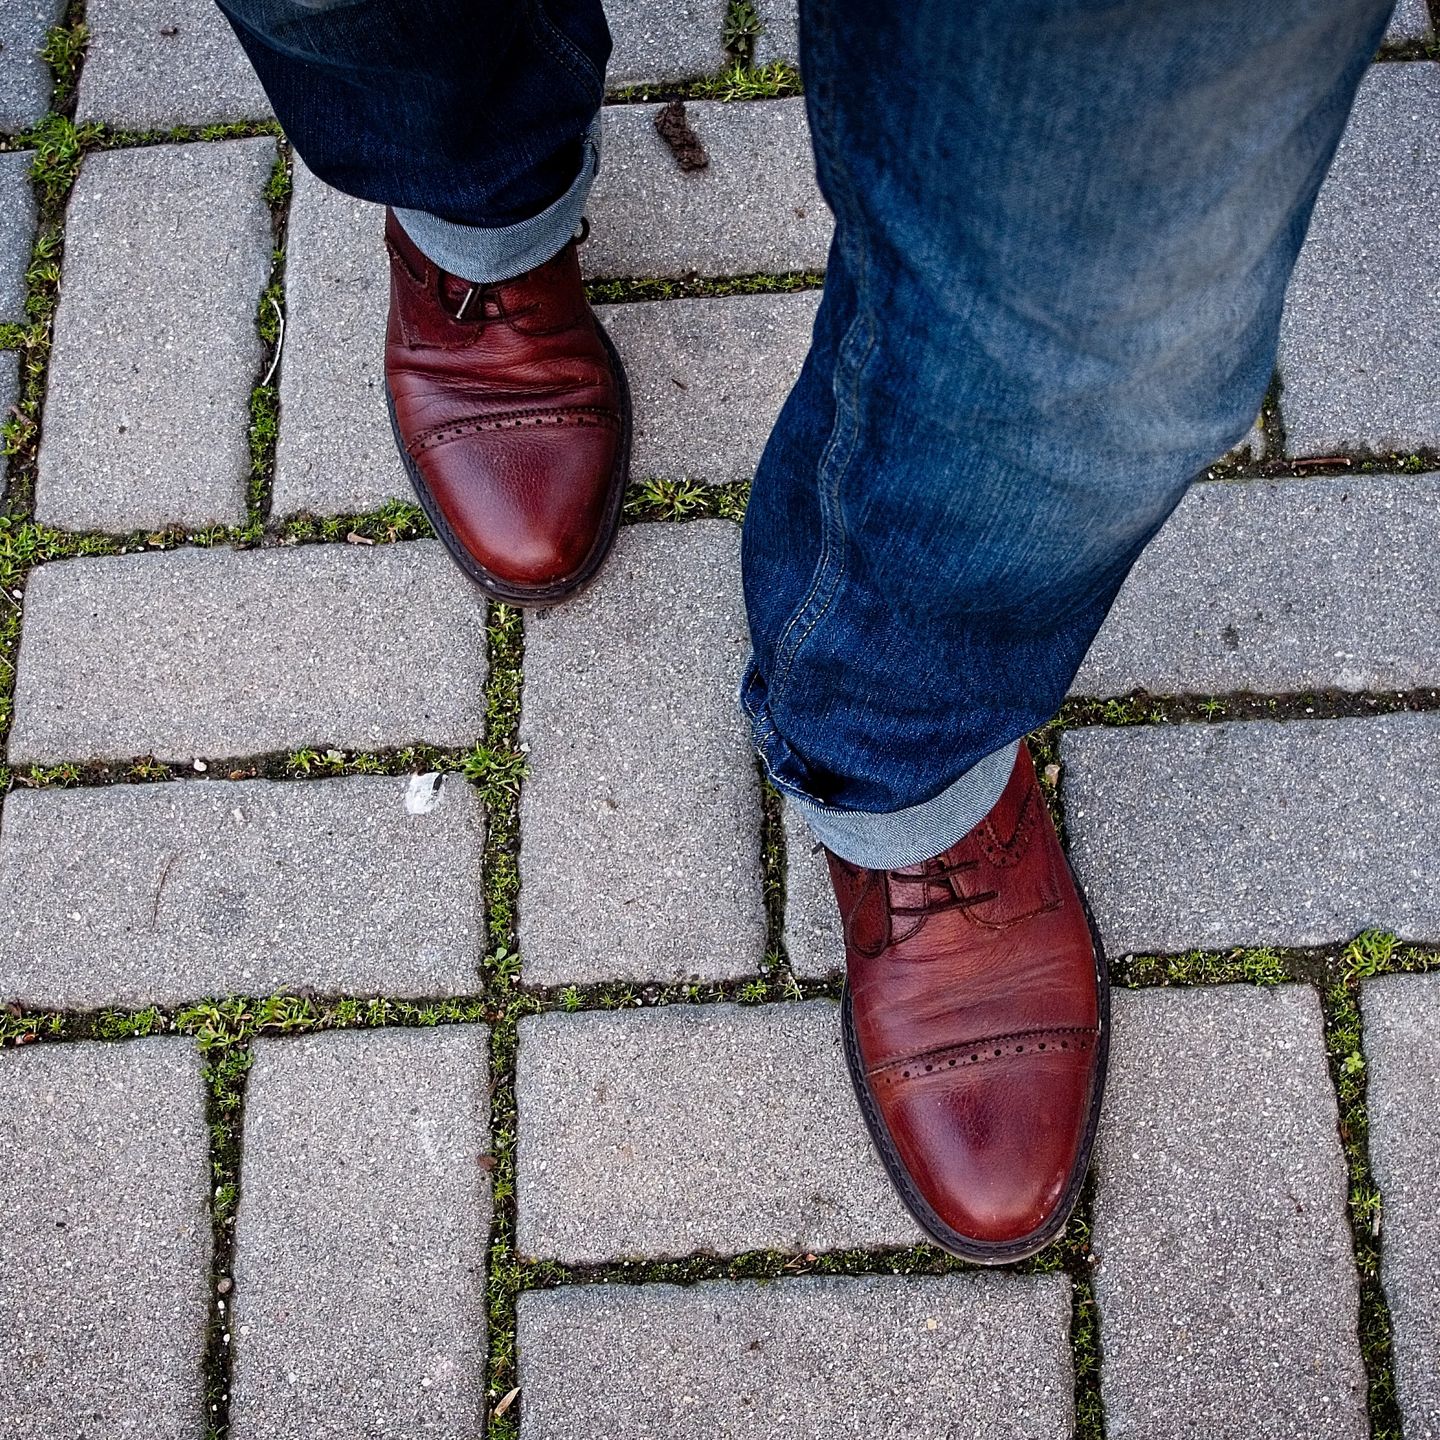 a person wearing a pair of brown shoes standing on a brick sidewalk​​​​‌﻿‍﻿​‍​‍‌‍﻿﻿‌﻿​‍‌‍‍‌‌‍‌﻿‌‍‍‌‌‍﻿‍​‍​‍​﻿‍‍​‍​‍‌﻿​﻿‌‍​‌‌‍﻿‍‌‍‍‌‌﻿‌​‌﻿‍‌​‍﻿‍‌‍‍‌‌‍﻿﻿​‍​‍​‍﻿​​‍​‍‌‍‍​‌﻿​‍‌‍‌‌‌‍‌‍​‍​‍​﻿‍‍​‍​‍‌‍‍​‌﻿‌​‌﻿‌​‌﻿​​‌﻿​﻿​﻿‍‍​‍﻿﻿​‍﻿﻿‌﻿‌‍‌‍‍‌‌﻿​﻿‌﻿‌‌‌‍​‌‌‍﻿​​‍﻿‌‌‍‌‌‌‍‌​‌‍‍‌‌﻿‌​‌‍‍‌‌‍﻿‍‌‍‌﻿​‍﻿‌‌﻿​﻿‌﻿‌​‌﻿‌‌‌‍‌​‌‍‍‌‌‍﻿﻿​‍﻿‍‌﻿​﻿‌‍​‌‌‍﻿‍‌‍‍‌‌﻿‌​‌﻿‍‌​‍﻿‍‌‍​‍‌﻿‌‌‌‍‍‌‌‍﻿​‌‍‌​​‍﻿﻿‌﻿​‍‌‍‌‌‌‍﻿‌‌‍‍‌‌﻿‍​​‍﻿﻿‌‍‍‌‌‍﻿‍‌﻿‌​‌‍‌‌‌‍﻿‍‌﻿‌​​‍﻿﻿‌‍‌‌‌‍‌​‌‍‍‌‌﻿‌​​‍﻿﻿‌‍﻿‌‌‍﻿﻿‌‍‌​‌‍‌‌​﻿﻿‌‌﻿​​‌﻿​‍‌‍‌‌‌﻿​﻿‌‍‌‌‌‍﻿‍‌﻿‌​‌‍​‌‌﻿‌​‌‍‍‌‌‍﻿﻿‌‍﻿‍​﻿‍﻿‌‍‍‌‌‍‌​​﻿﻿‌​﻿‌﻿‌‍​‍​﻿‌‌‌‍​‍‌‍‌‍‌‍‌​​﻿‌‍‌‍‌‌​‍﻿‌‌‍‌‌​﻿‌​​﻿​​​﻿​‍​‍﻿‌​﻿‌​​﻿​‍​﻿‍‌​﻿‌﻿​‍﻿‌‌‍​‍​﻿‍​‌‍​‌‌‍​﻿​‍﻿‌​﻿​﻿​﻿‌​‌‍​‍​﻿‌‌​﻿​​​﻿‌​​﻿​‌​﻿‌‍‌‍‌​​﻿‍​‌‍‌​‌‍​﻿​﻿‍﻿‌﻿‌​‌﻿‍‌‌﻿​​‌‍‌‌​﻿﻿‌‌﻿​﻿‌‍‍​‌‍﻿﻿‌‍‌‌​﻿‍﻿‌﻿​​‌‍​‌‌﻿‌​‌‍‍​​﻿﻿‌‌‍﻿‌‌‍‌‌‌‍‌​‌‍‍‌‌‍​‌​‍‌‌​﻿‌‌‌​​‍‌‌﻿﻿‌‍‍﻿‌‍‌‌‌﻿‍‌​‍‌‌​﻿​﻿‌​‌​​‍‌‌​﻿​﻿‌​‌​​‍‌‌​﻿​‍​﻿​‍​﻿‌﻿​﻿‌‌‌‍‌‌​﻿‌​​﻿‌‍​﻿​​​﻿‍​​﻿​‍​﻿‌‍‌‍‌​​﻿​‍‌‍​‍​‍‌‌​﻿​‍​﻿​‍​‍‌‌​﻿‌‌‌​‌​​‍﻿‍‌‍​‌‌‍﻿​‌﻿‌​​﻿‍﻿‌﻿‌​‌‍﻿﻿‌‍﻿﻿‌‍﻿​​﻿﻿‌‌﻿​​‌﻿​‍‌‍‌‌‌﻿​﻿‌‍‌‌‌‍﻿‍‌﻿‌​‌‍​‌‌﻿‌​‌‍‍‌‌‍﻿﻿‌‍﻿‍​﻿﻿﻿‌‍​‍‌‍​‌‌﻿​﻿‌‍‌‌‌‌‌‌‌﻿​‍‌‍﻿​​﻿﻿‌‌‍‍​‌﻿‌​‌﻿‌​‌﻿​​‌﻿​﻿​‍‌‌​﻿​﻿‌​​‌​‍‌‌​﻿​‍‌​‌‍​‍‌‌​﻿​‍‌​‌‍‌﻿‌‍‌‍‍‌‌﻿​﻿‌﻿‌‌‌‍​‌‌‍﻿​​‍﻿‌‌‍‌‌‌‍‌​‌‍‍‌‌﻿‌​‌‍‍‌‌‍﻿‍‌‍‌﻿​‍﻿‌‌﻿​﻿‌﻿‌​‌﻿‌‌‌‍‌​‌‍‍‌‌‍﻿﻿​‍﻿‍‌﻿​﻿‌‍​‌‌‍﻿‍‌‍‍‌‌﻿‌​‌﻿‍‌​‍﻿‍‌‍​‍‌﻿‌‌‌‍‍‌‌‍﻿​‌‍‌​​‍‌‍‌‍‍‌‌‍‌​​﻿﻿‌​﻿‌﻿‌‍​‍​﻿‌‌‌‍​‍‌‍‌‍‌‍‌​​﻿‌‍‌‍‌‌​‍﻿‌‌‍‌‌​﻿‌​​﻿​​​﻿​‍​‍﻿‌​﻿‌​​﻿​‍​﻿‍‌​﻿‌﻿​‍﻿‌‌‍​‍​﻿‍​‌‍​‌‌‍​﻿​‍﻿‌​﻿​﻿​﻿‌​‌‍​‍​﻿‌‌​﻿​​​﻿‌​​﻿​‌​﻿‌‍‌‍‌​​﻿‍​‌‍‌​‌‍​﻿​‍‌‍‌﻿‌​‌﻿‍‌‌﻿​​‌‍‌‌​﻿﻿‌‌﻿​﻿‌‍‍​‌‍﻿﻿‌‍‌‌​‍‌‍‌﻿​​‌‍​‌‌﻿‌​‌‍‍​​﻿﻿‌‌‍﻿‌‌‍‌‌‌‍‌​‌‍‍‌‌‍​‌​‍‌‌​﻿‌‌‌​​‍‌‌﻿﻿‌‍‍﻿‌‍‌‌‌﻿‍‌​‍‌‌​﻿​﻿‌​‌​​‍‌‌​﻿​﻿‌​‌​​‍‌‌​﻿​‍​﻿​‍​﻿‌﻿​﻿‌‌‌‍‌‌​﻿‌​​﻿‌‍​﻿​​​﻿‍​​﻿​‍​﻿‌‍‌‍‌​​﻿​‍‌‍​‍​‍‌‌​﻿​‍​﻿​‍​‍‌‌​﻿‌‌‌​‌​​‍﻿‍‌‍​‌‌‍﻿​‌﻿‌​​‍‌‍‌﻿‌﻿‌‍﻿﻿‌﻿​‍‌‍‍﻿‌﻿​﻿‌﻿​​‌‍​‌‌‍​﻿‌‍‌‌​﻿﻿‌‌﻿​‍‌‍‌‌‌‍﻿‌‌‍‍‌‌﻿‍​​‍‌‍‌﻿‌​‌‍﻿﻿‌‍﻿﻿‌‍﻿​​﻿﻿‌‌﻿​​‌﻿​‍‌‍‌‌‌﻿​﻿‌‍‌‌‌‍﻿‍‌﻿‌​‌‍​‌‌﻿‌​‌‍‍‌‌‍﻿﻿‌‍﻿‍​‍​‍‌﻿﻿‌